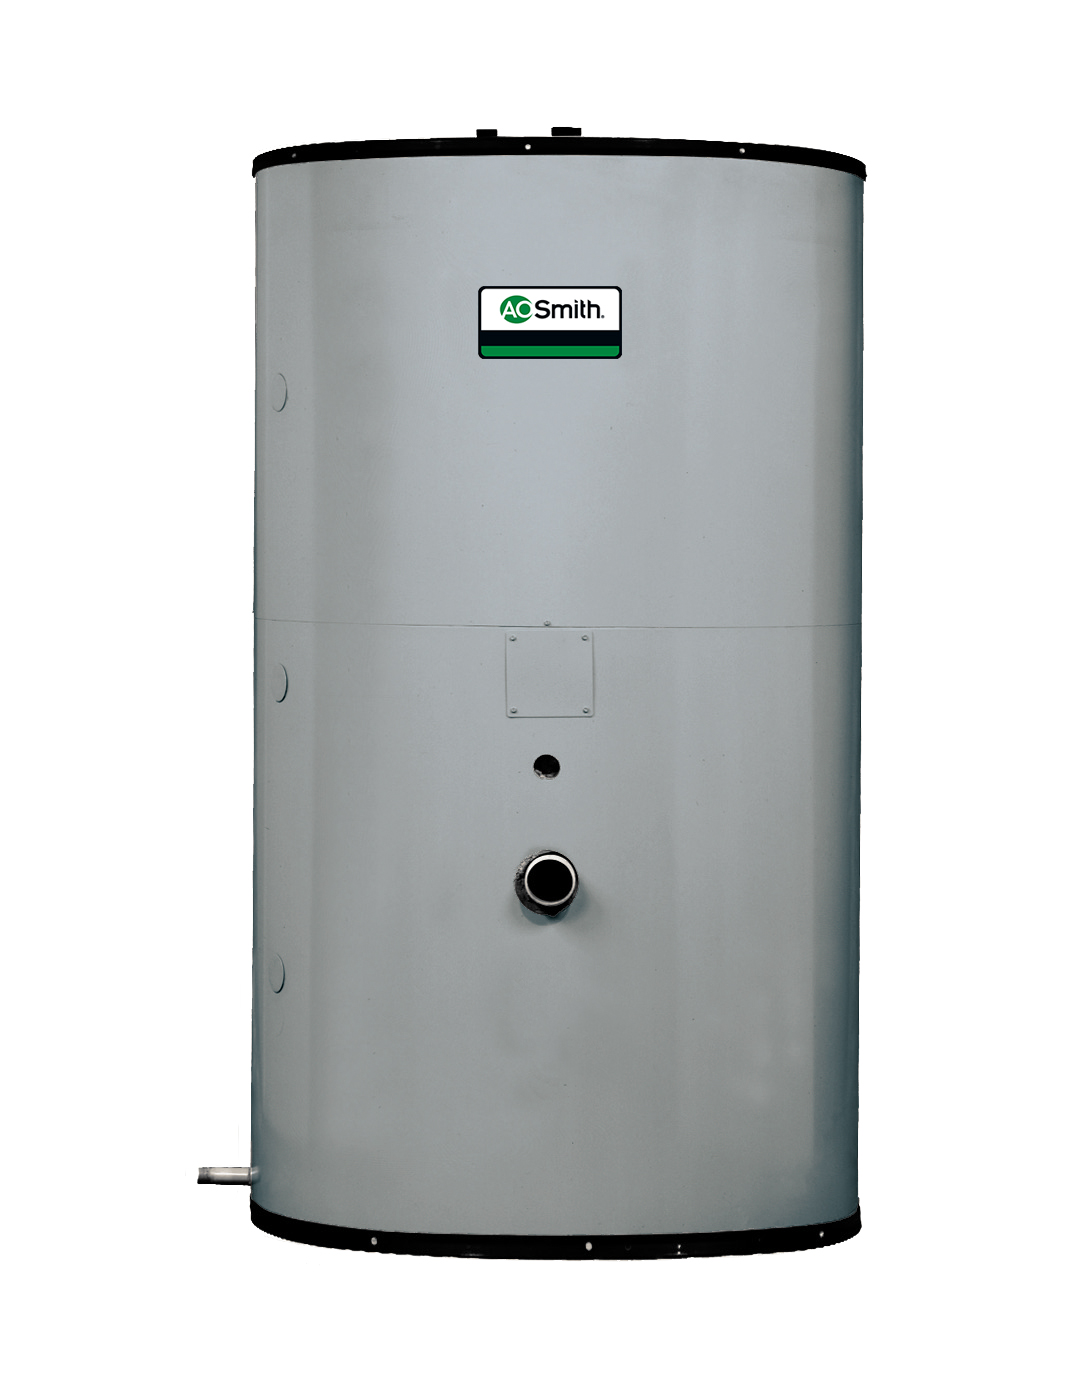 AO SMITH TJV-120M: 119 GALLON, JACKETED-VERTICAL ONLY, ROUND WATER HEATER STORAGE TANK, 150 PSI